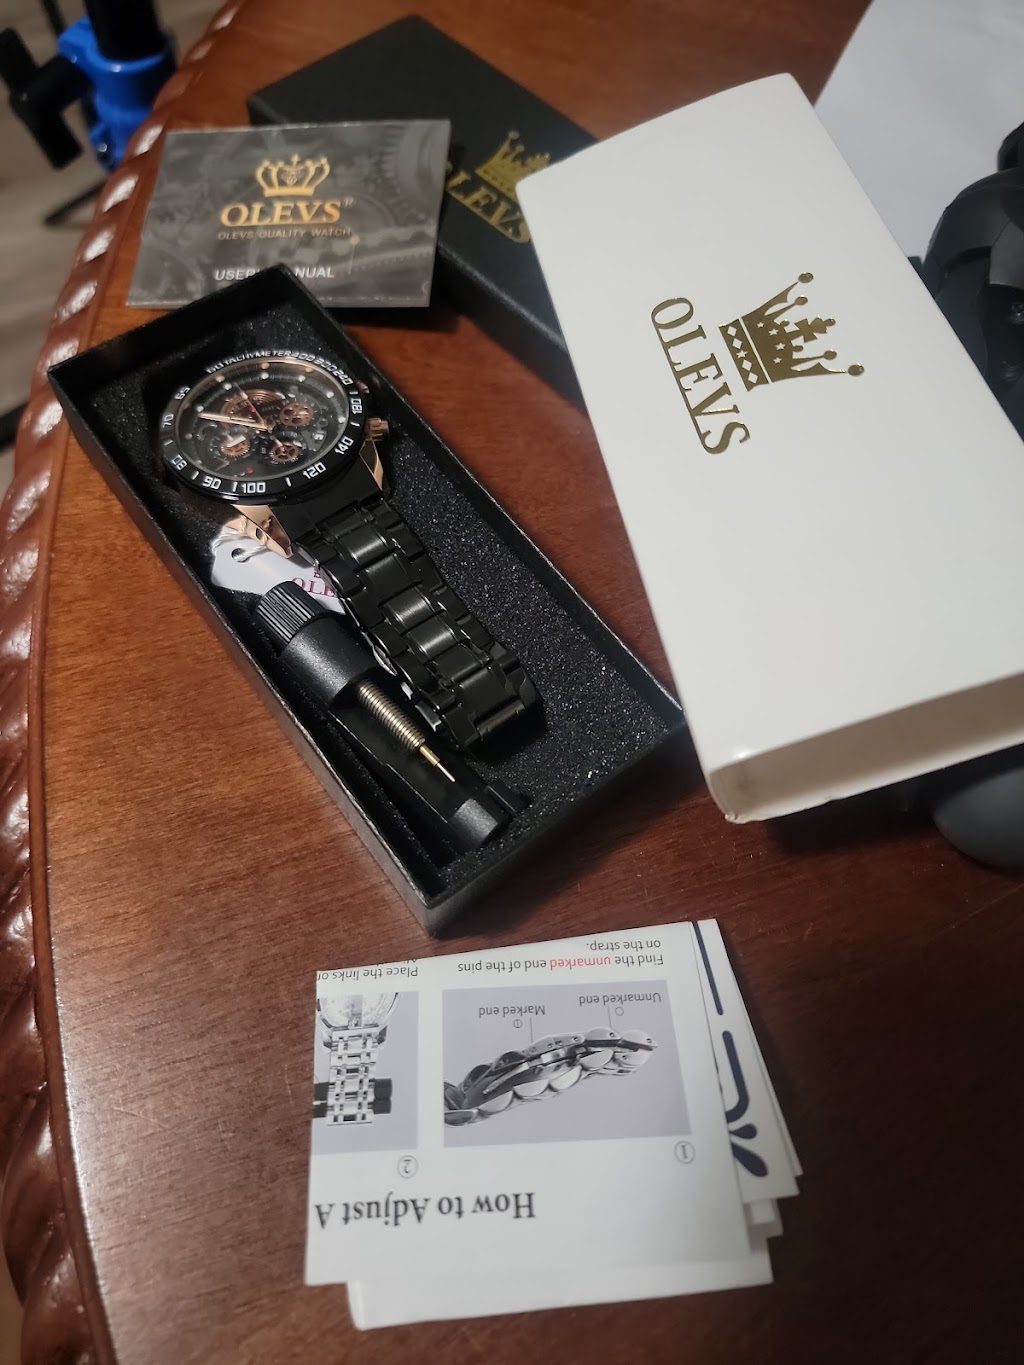 OLEVS WATCHES | 1025 Outlet Center Dr, Smithfield, NC 27577, USA | Phone: 8572300779